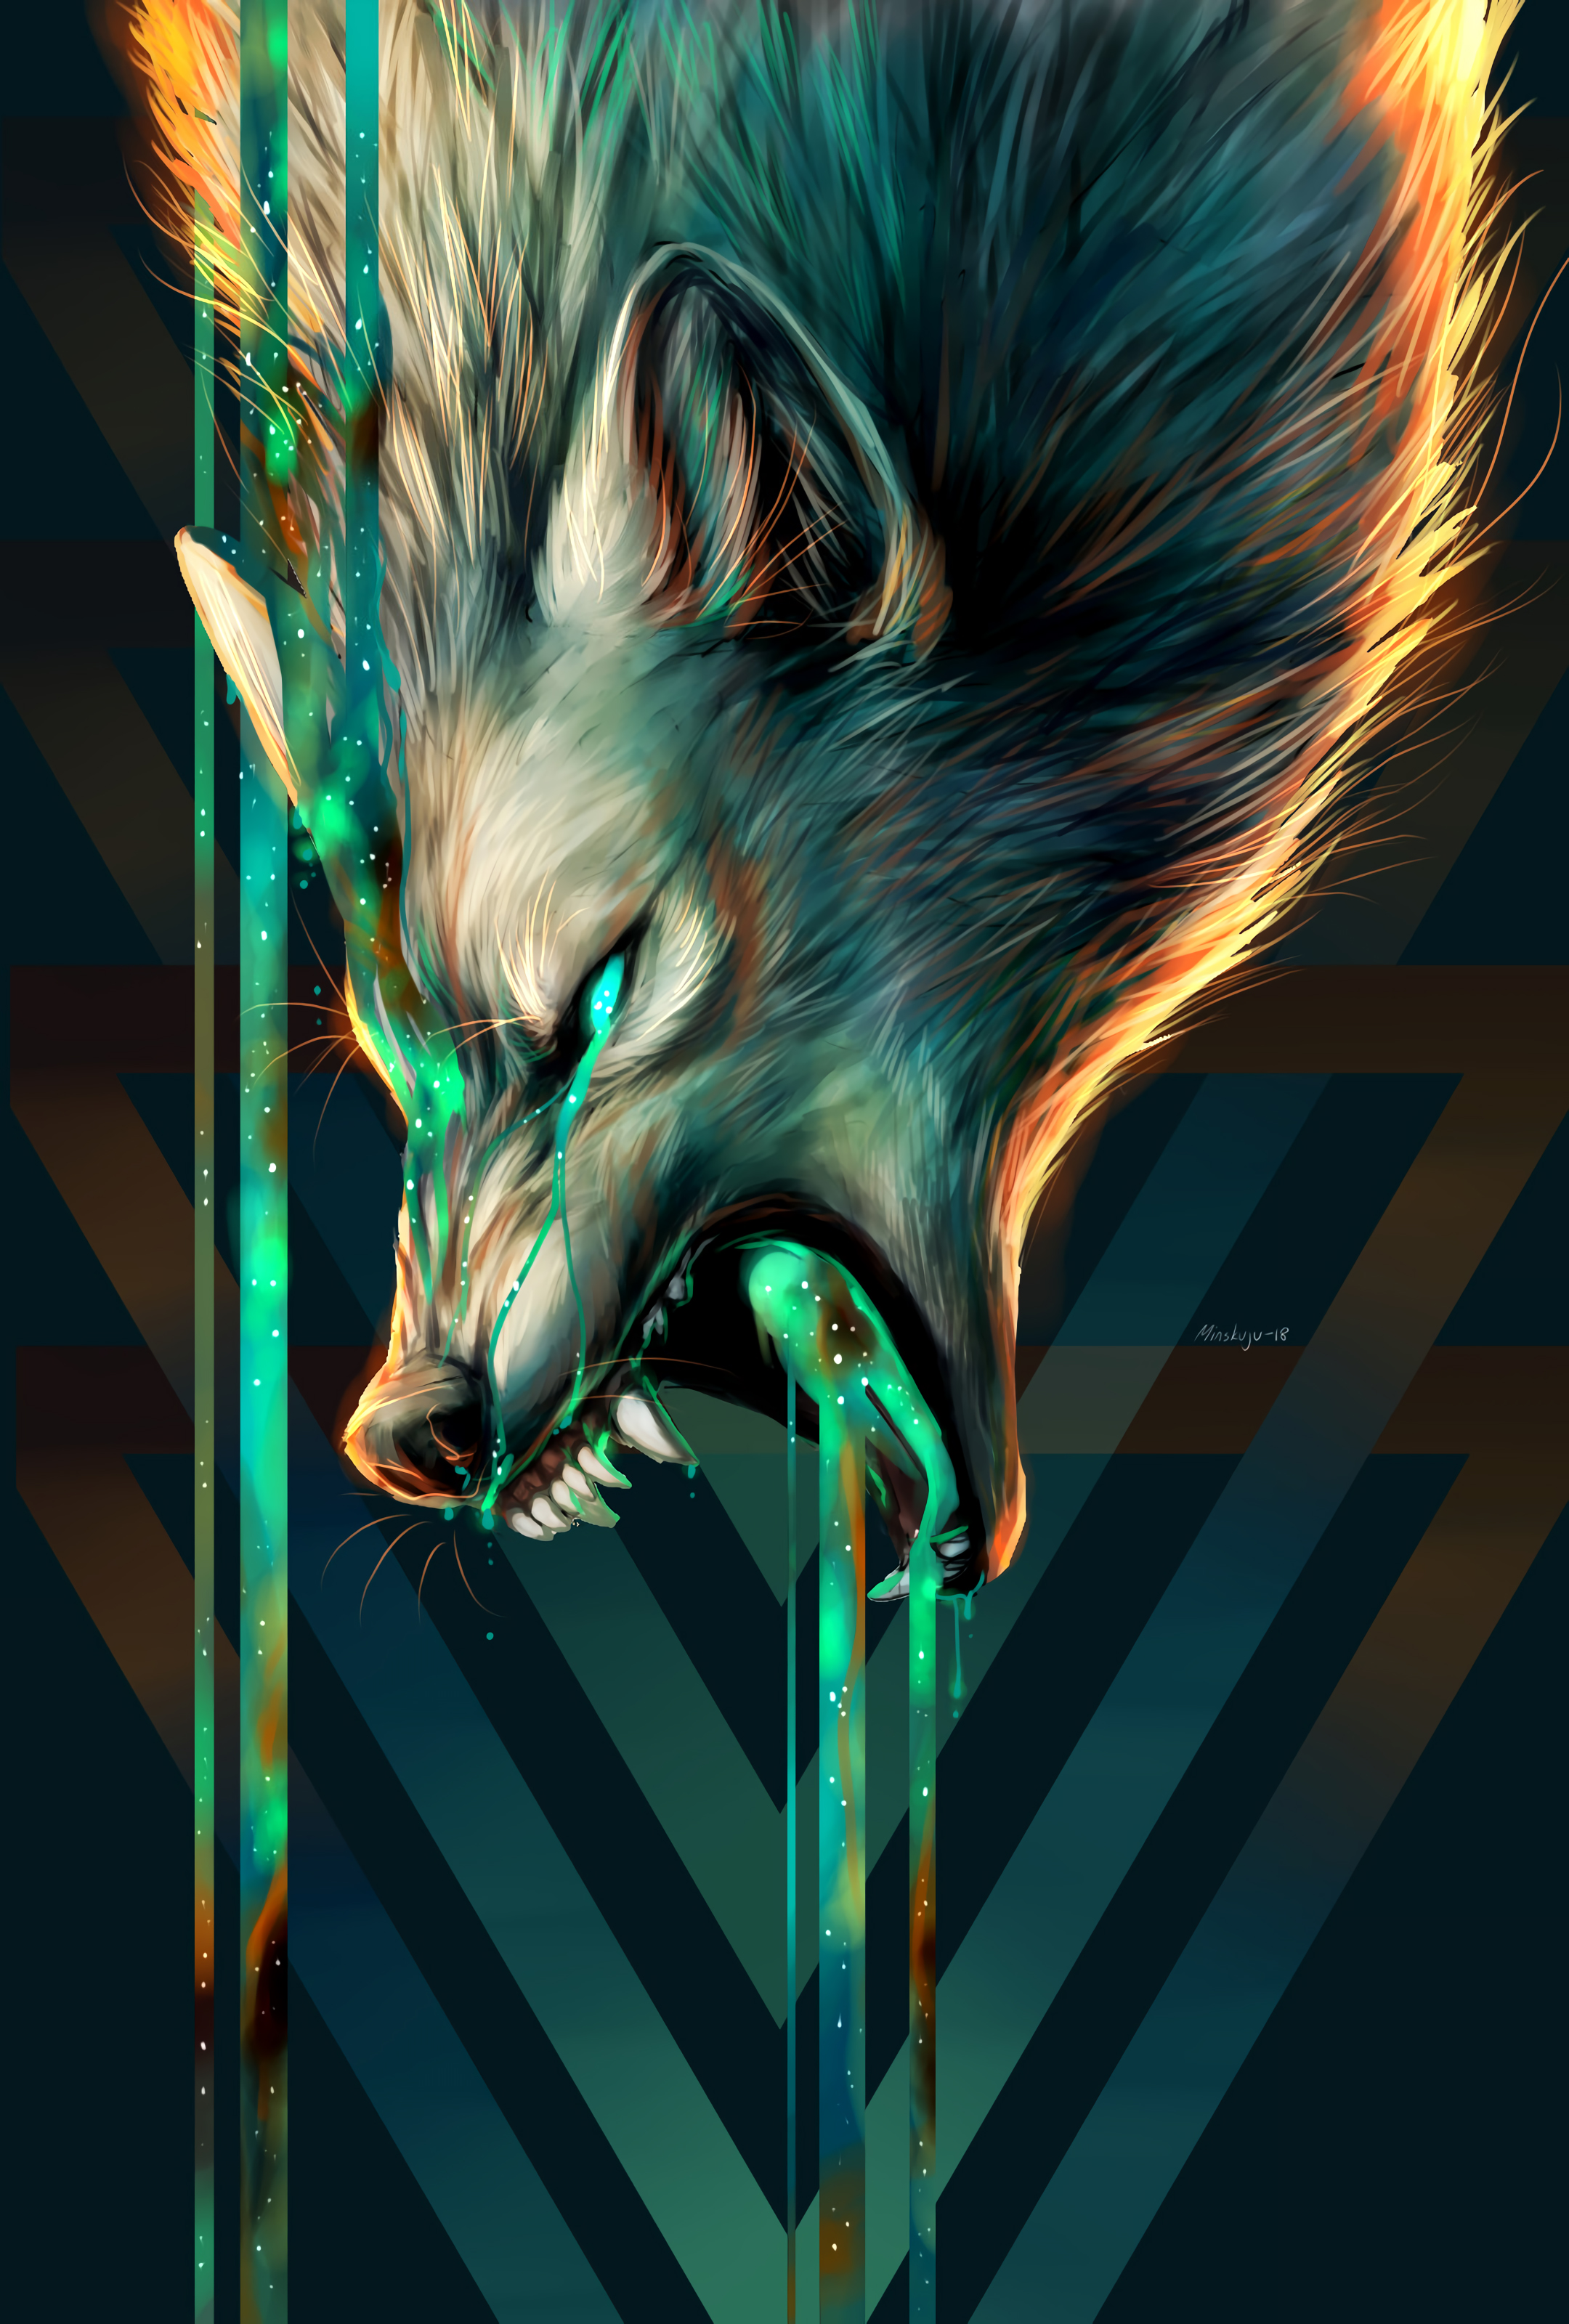 125051 free wallpaper 240x320 for phone, download images grin, wolf, art, illusion 240x320 for mobile